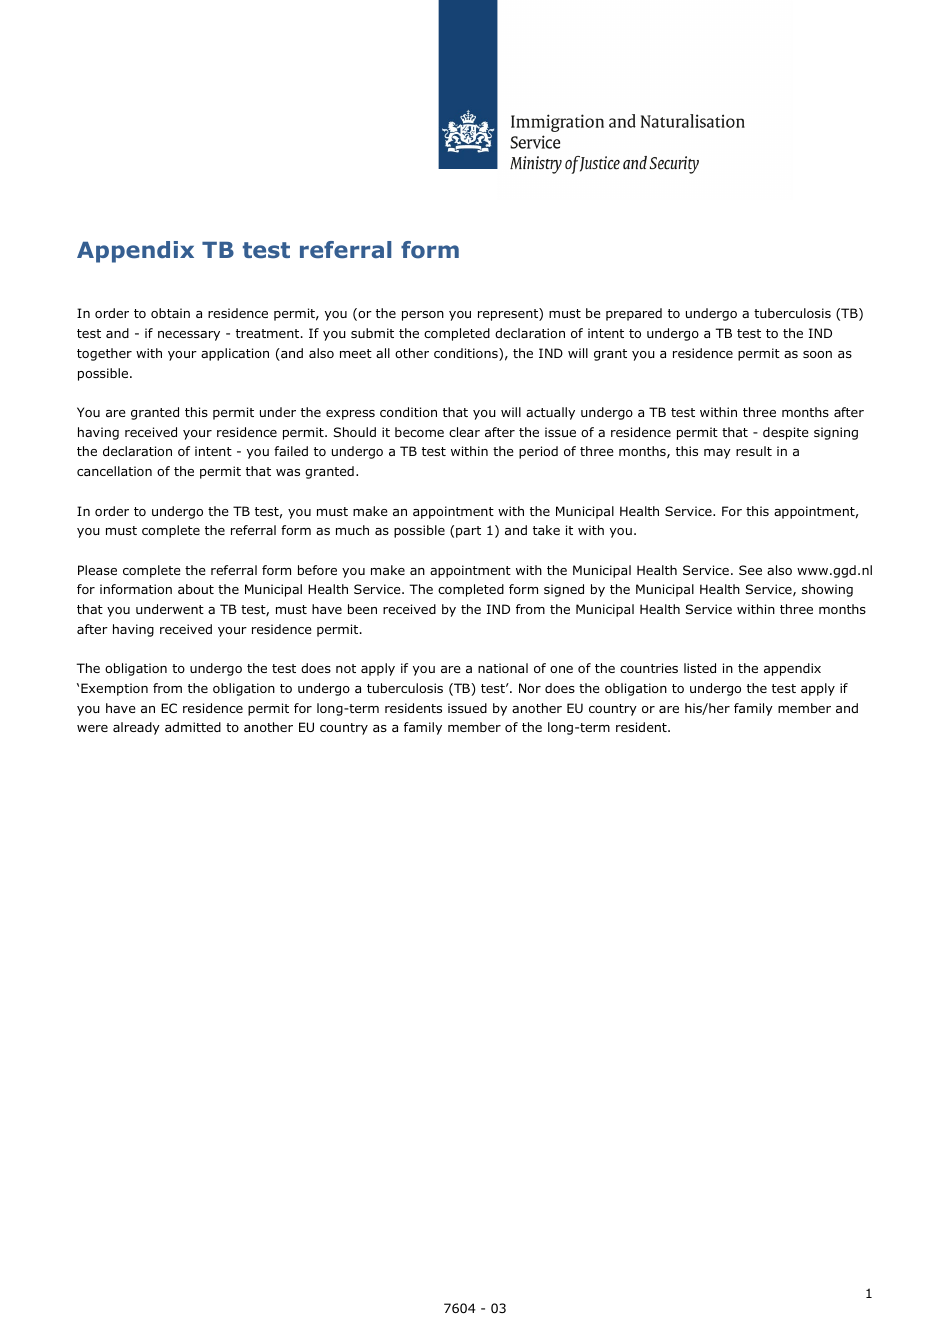 Appendix TB Test Referral Form - Netherlands, Page 1